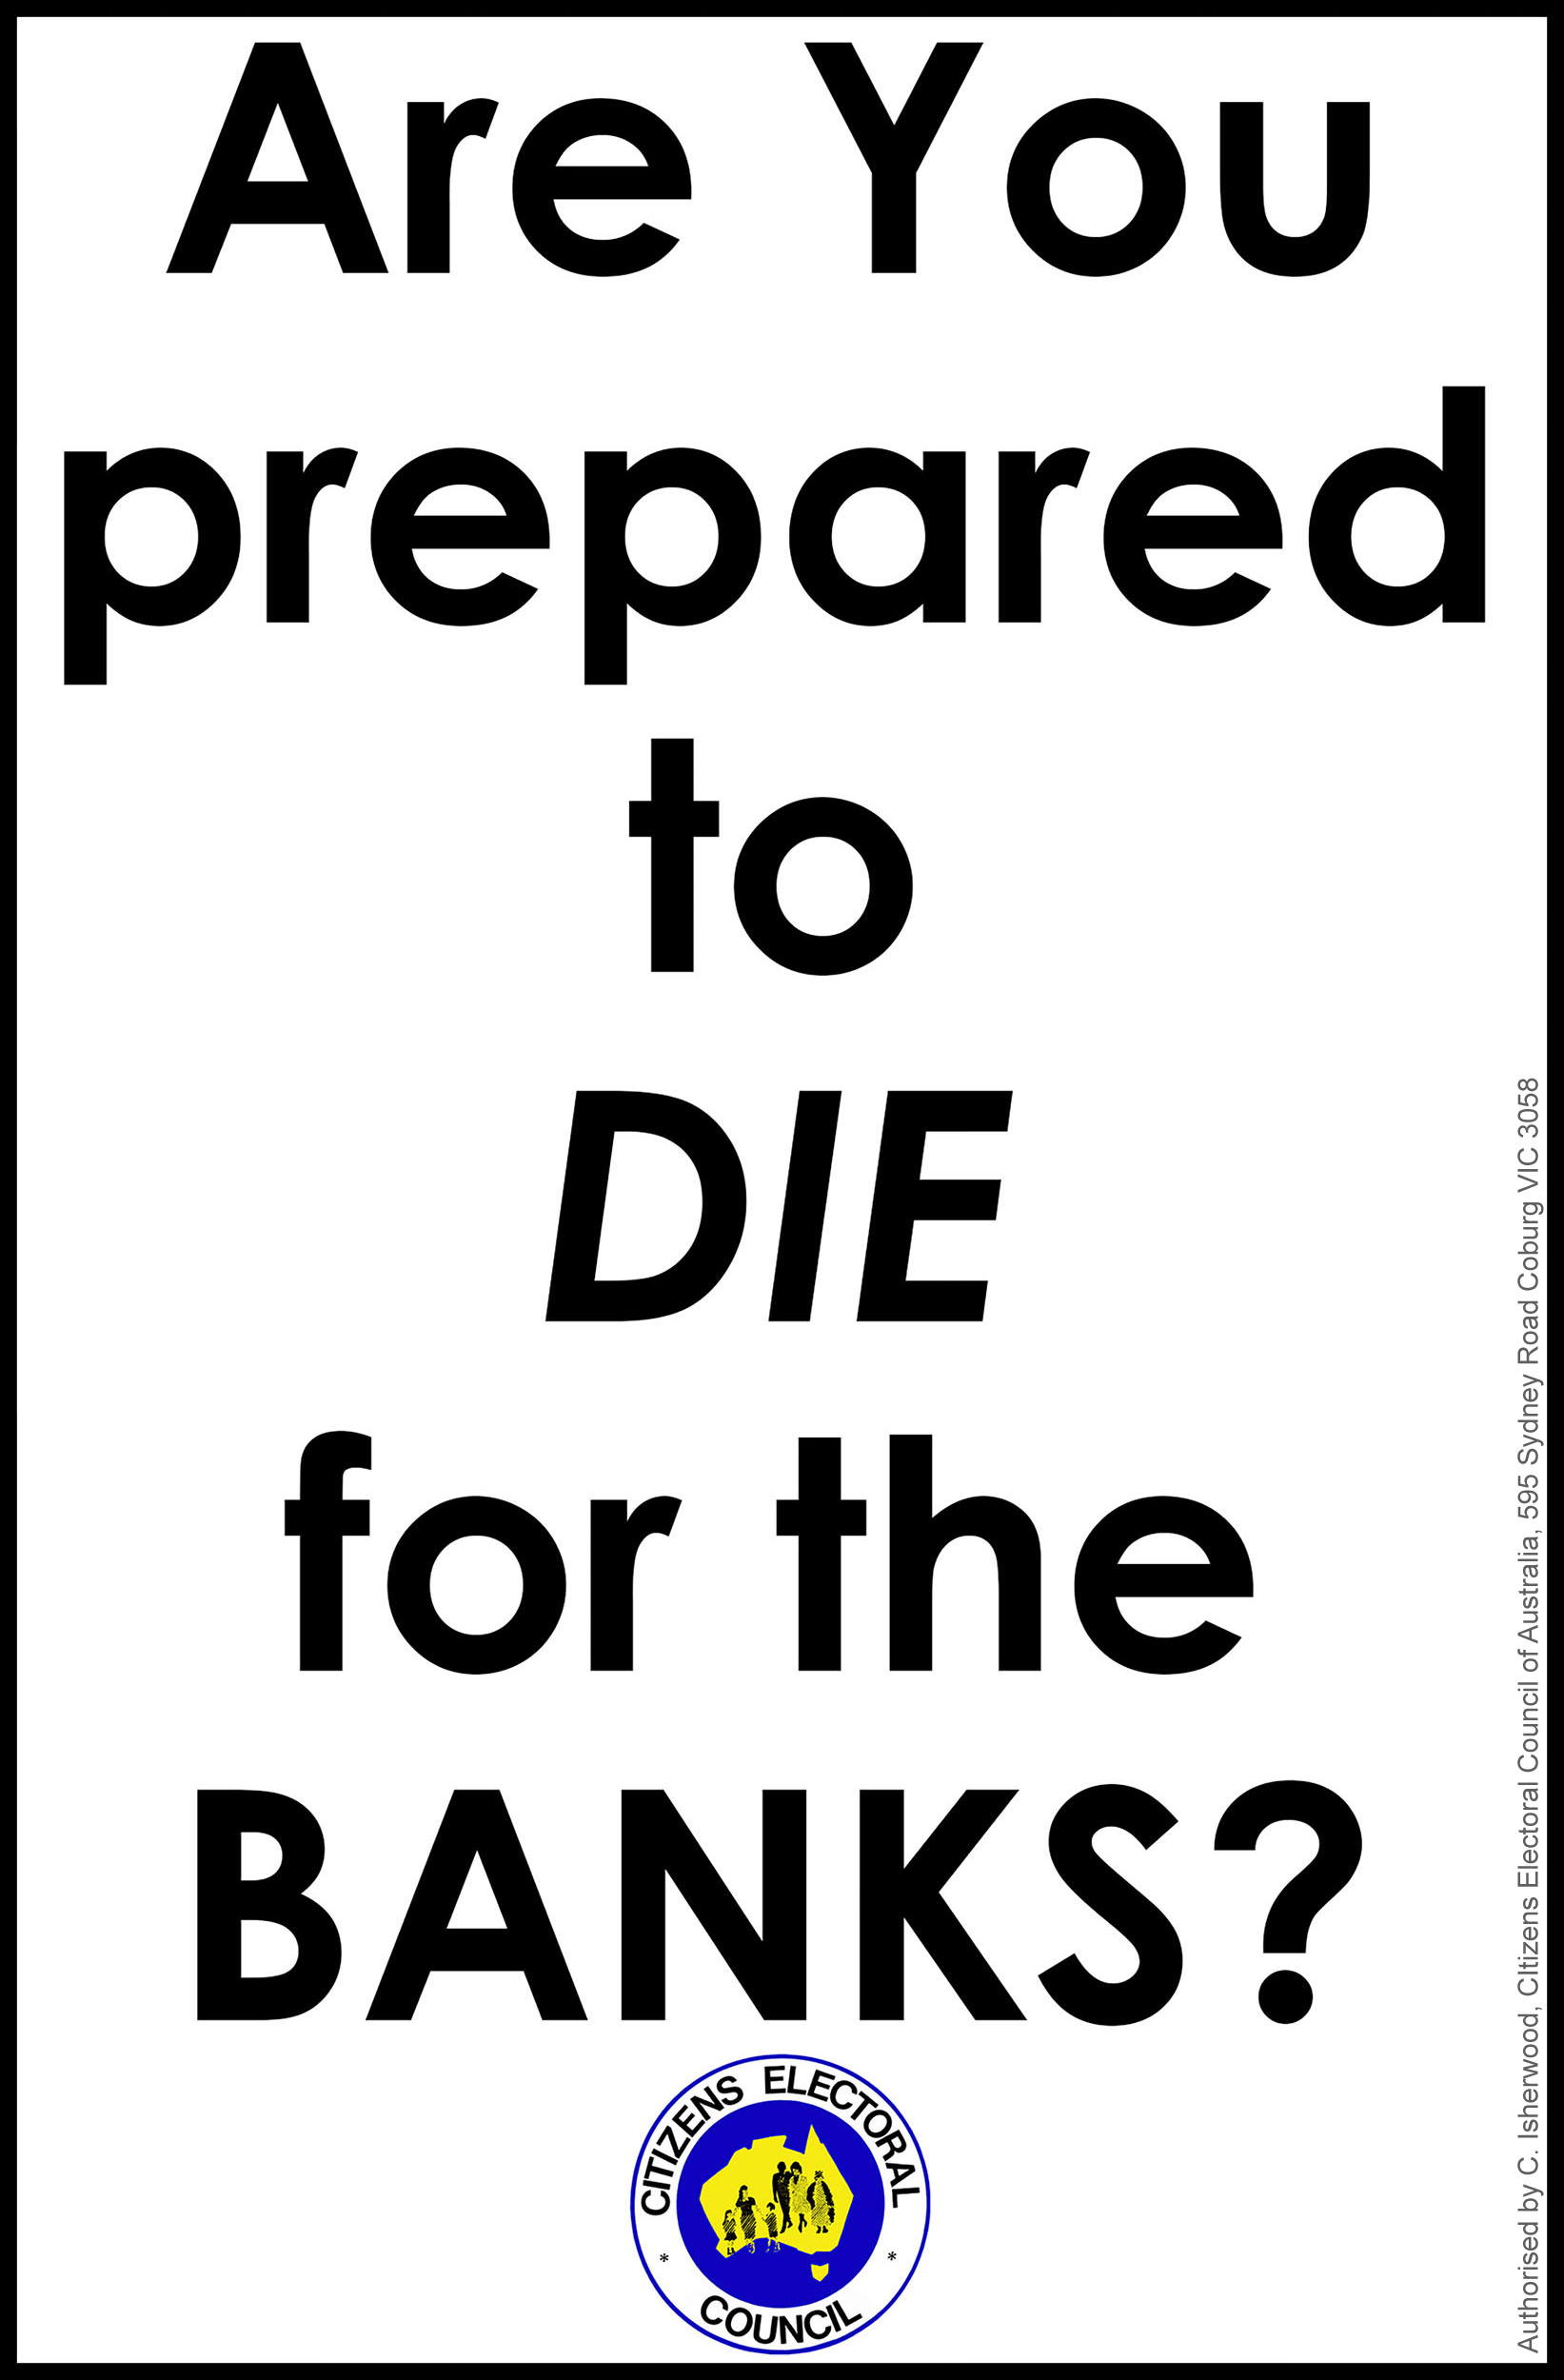 Are You prepared to DIE for the BANKS?